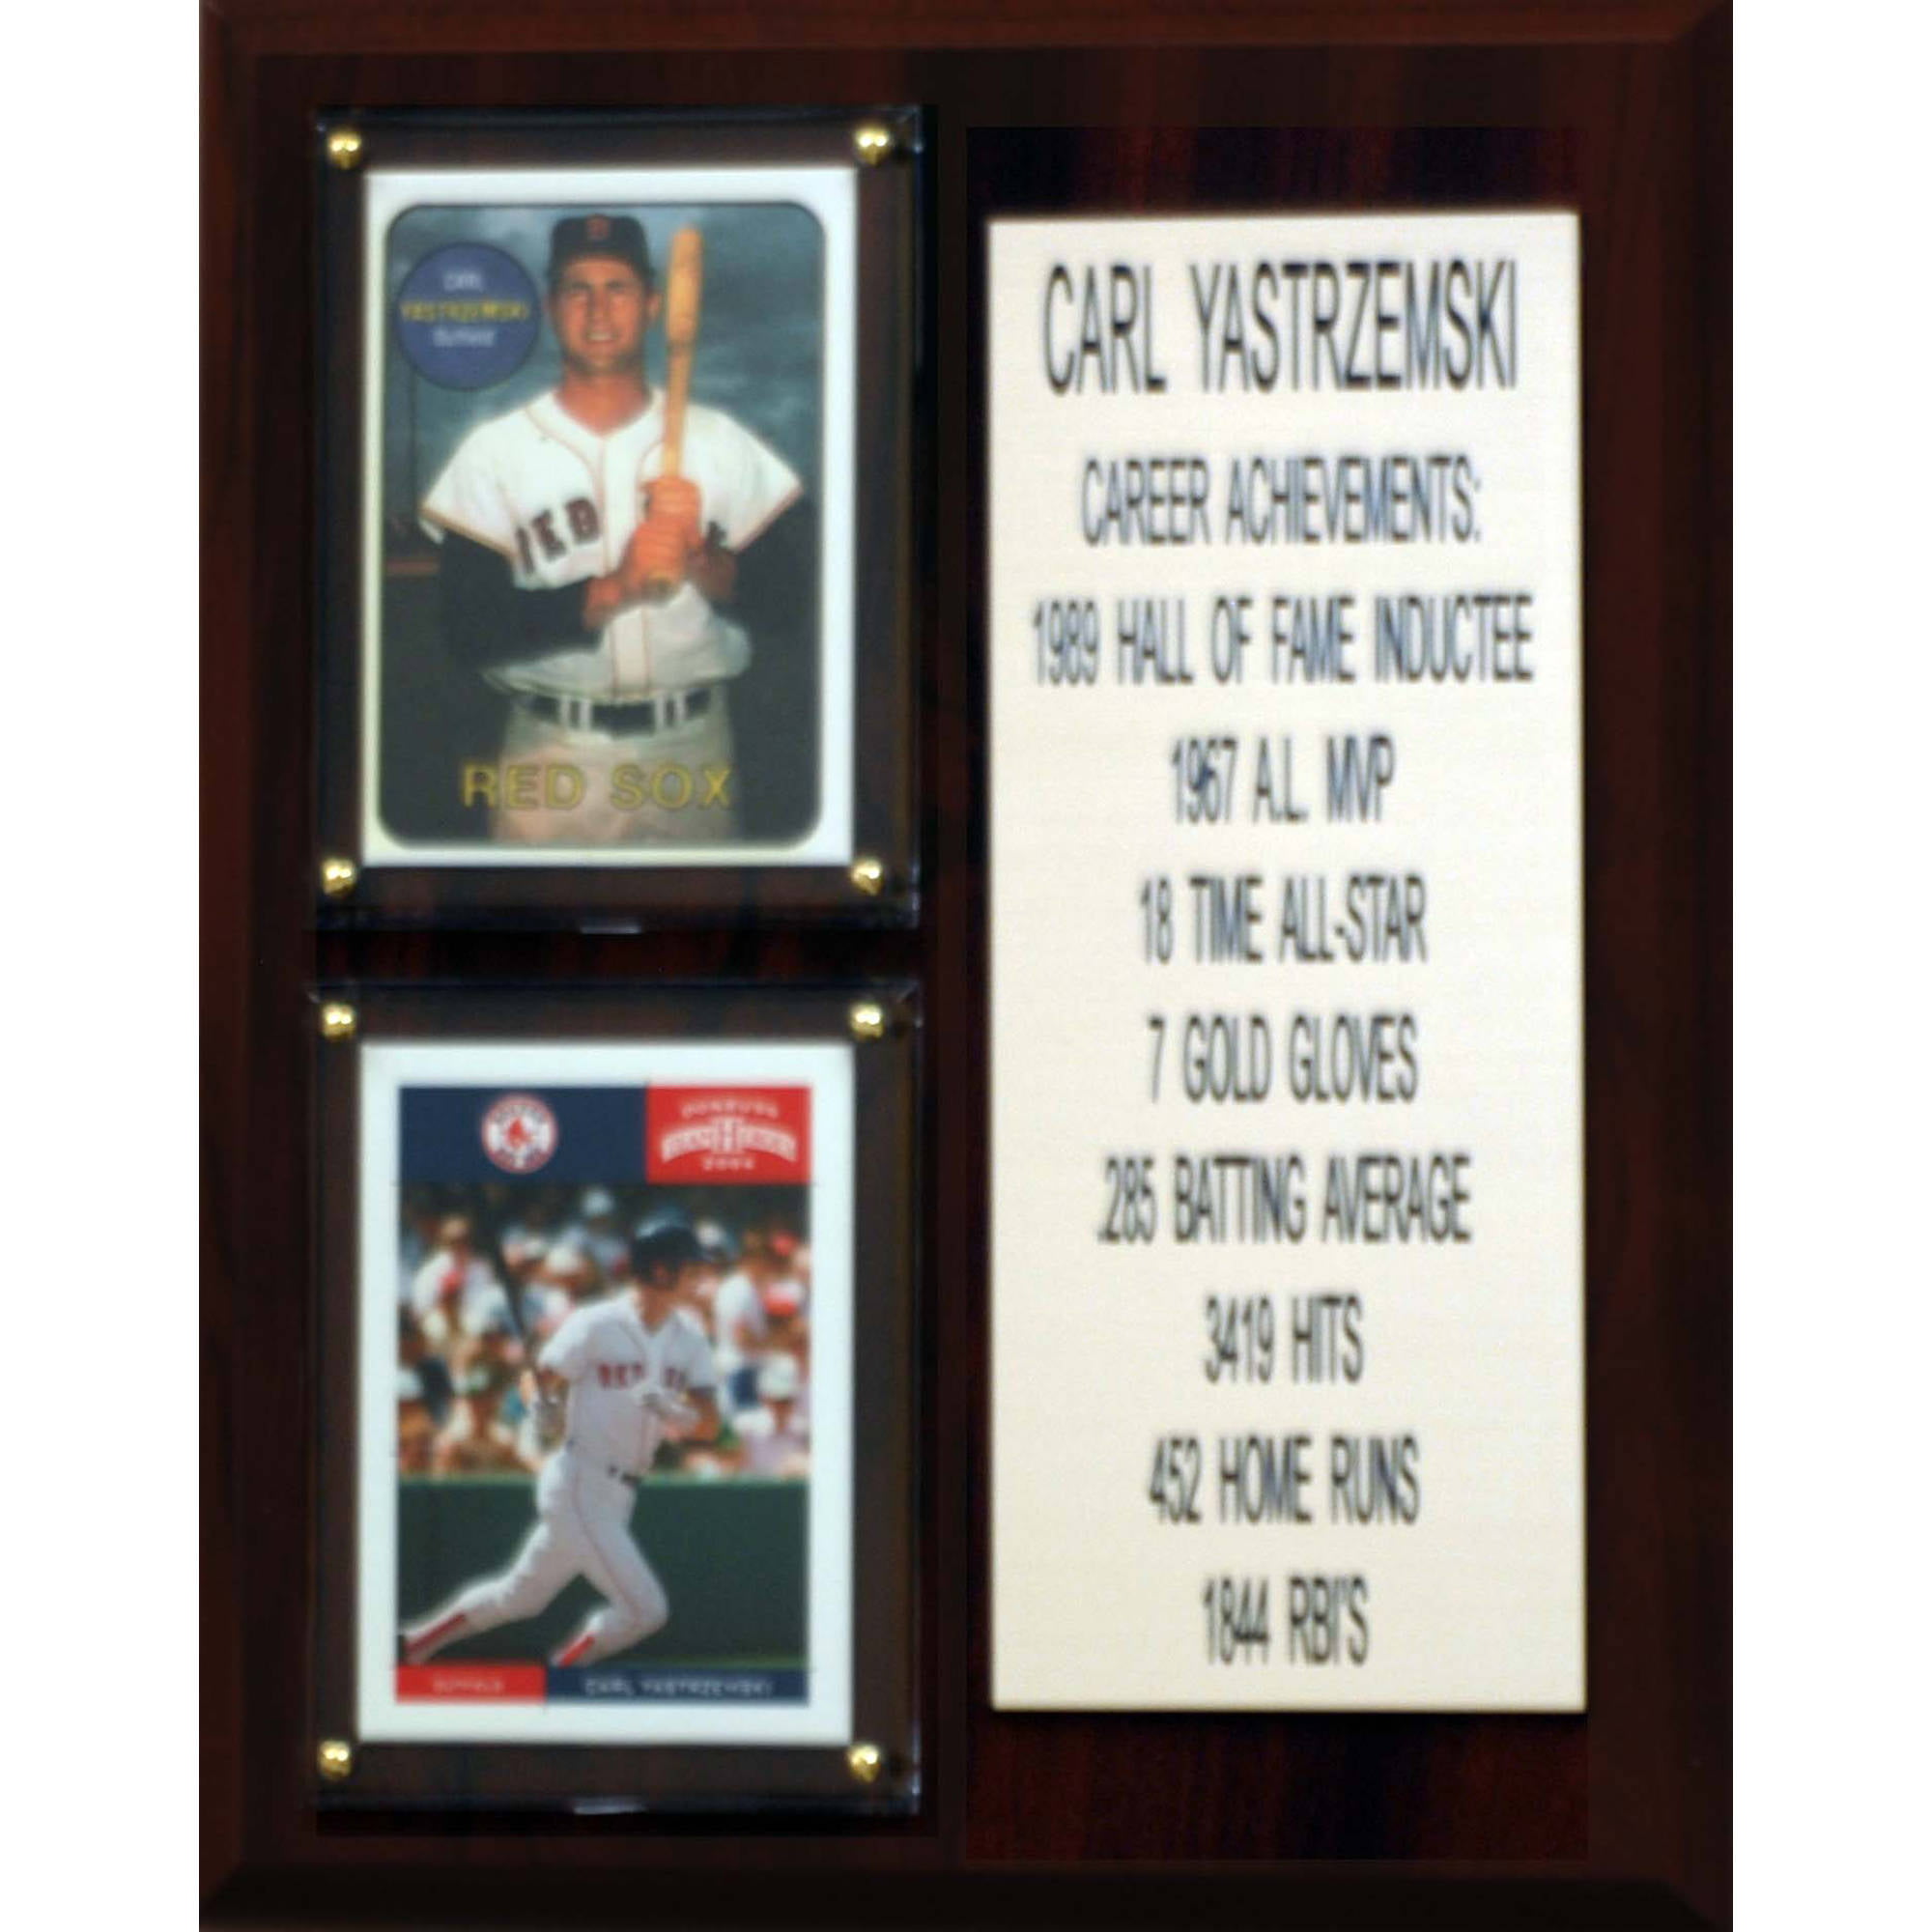 2007 Red Sox World Series Champions Collector Plaque w/8x10 Team Photo!